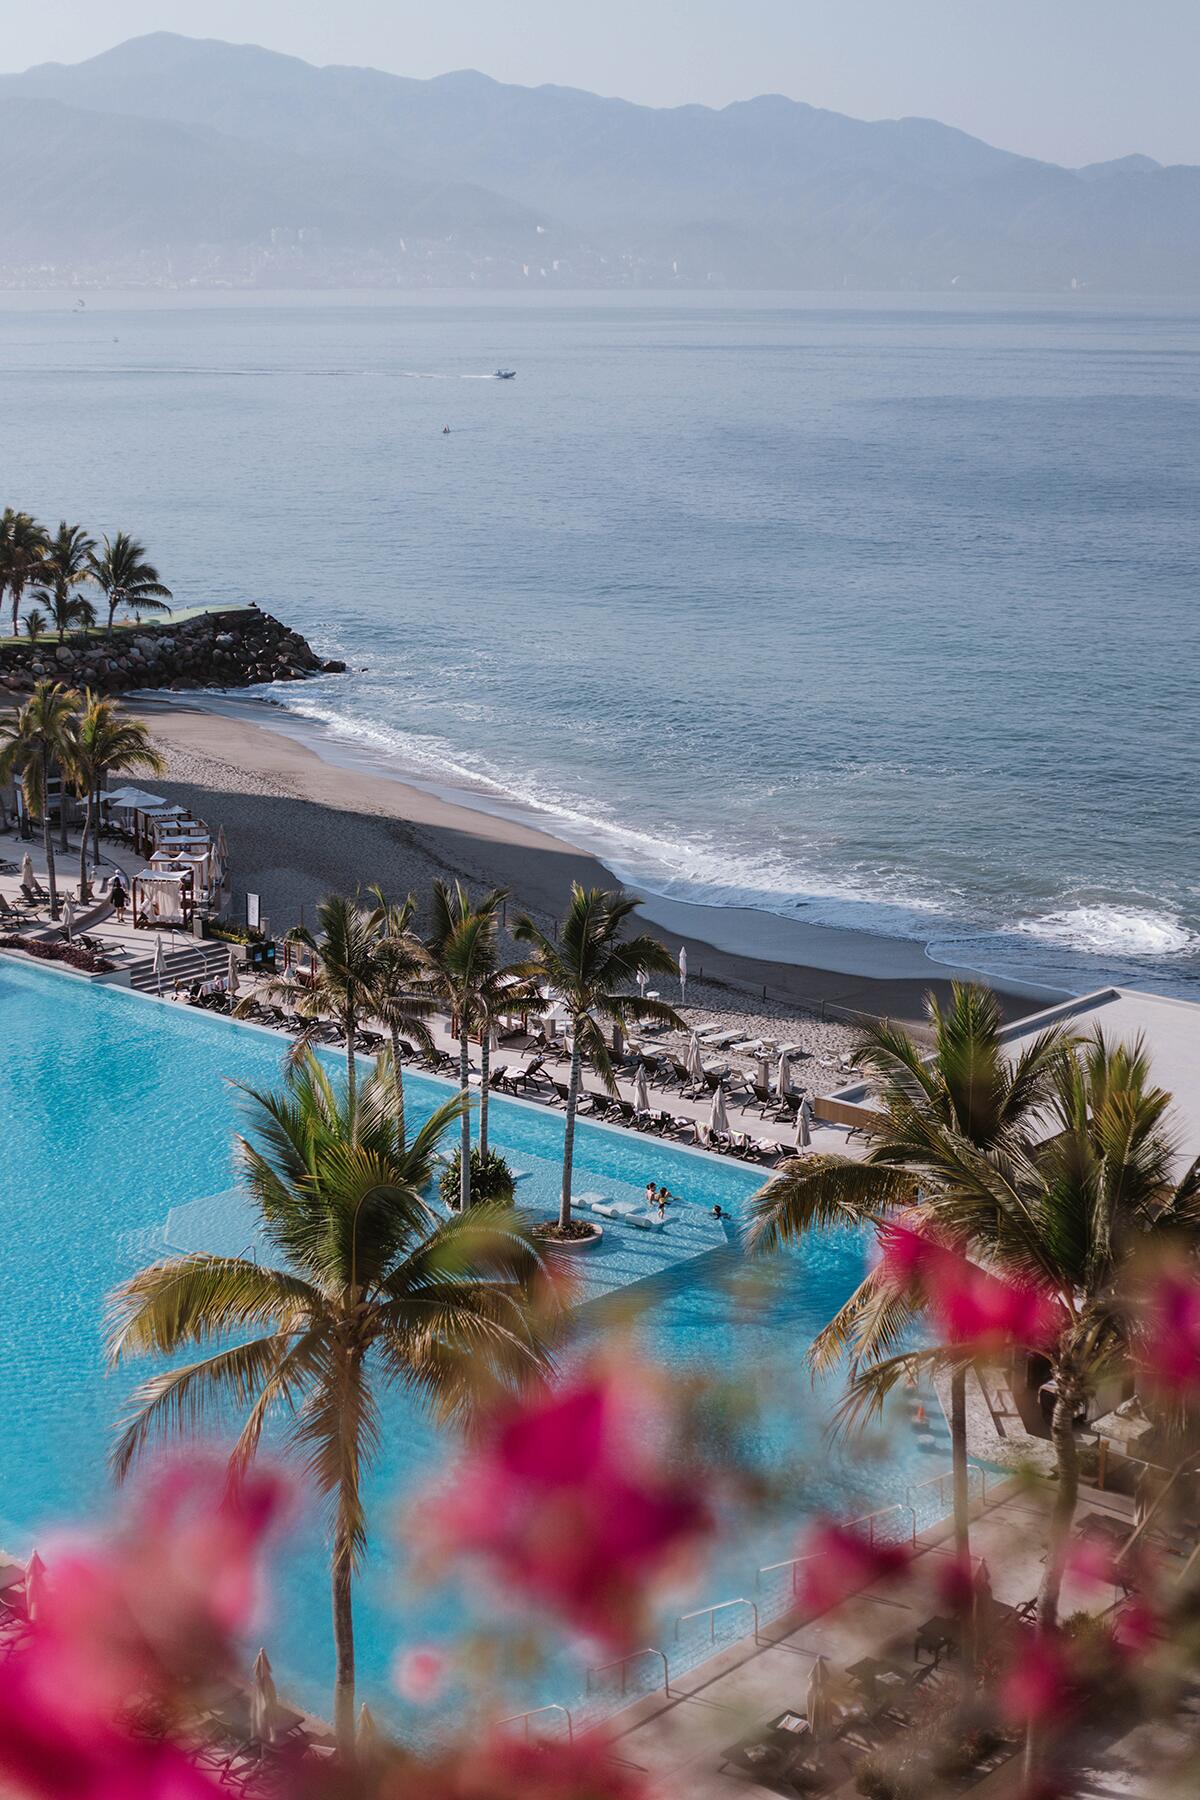 Rosie-Bell-Puerto-Vallarta-post-covid-trip-image-by-Bronwyn-Knight-Photography-Marriott-infinity-pool-and-flowers-2